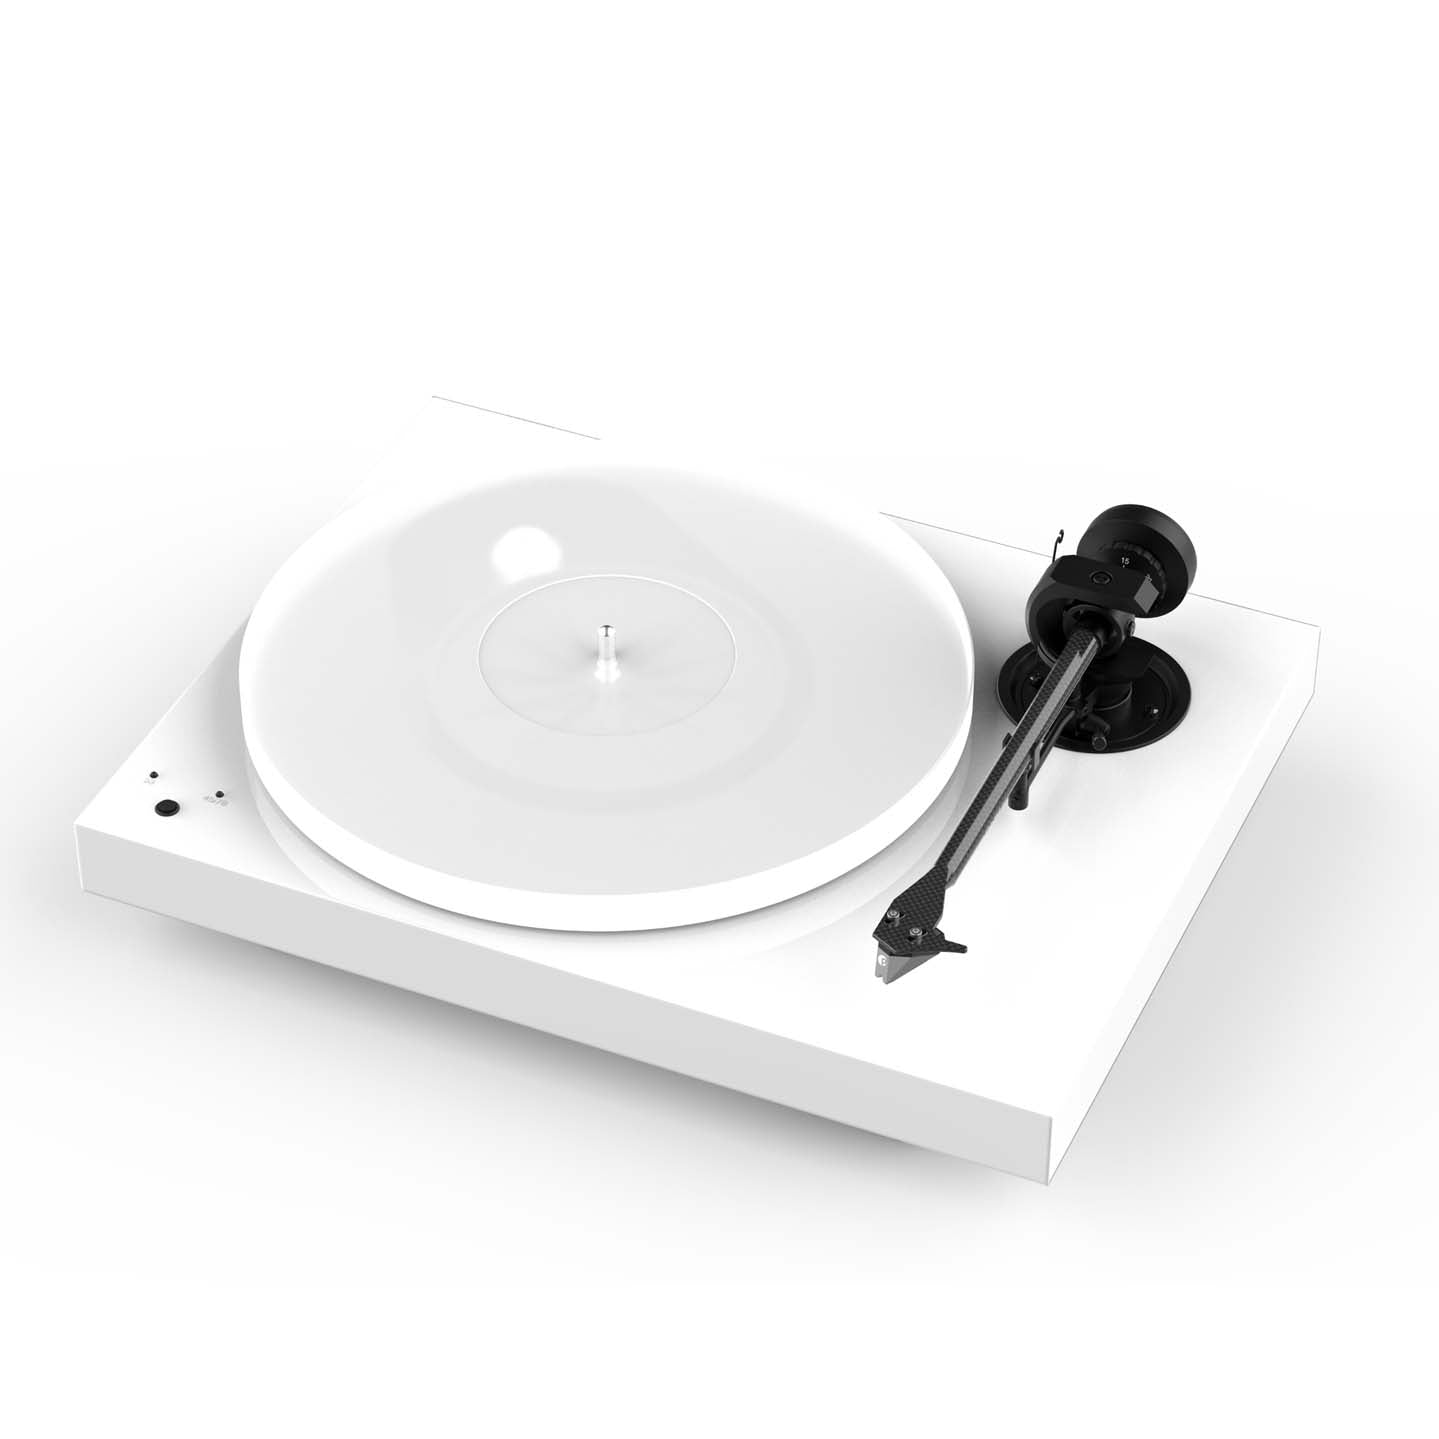 Pro-Ject X1 B Turntable with Pick It Pro Balanced Pre-Fitted - White